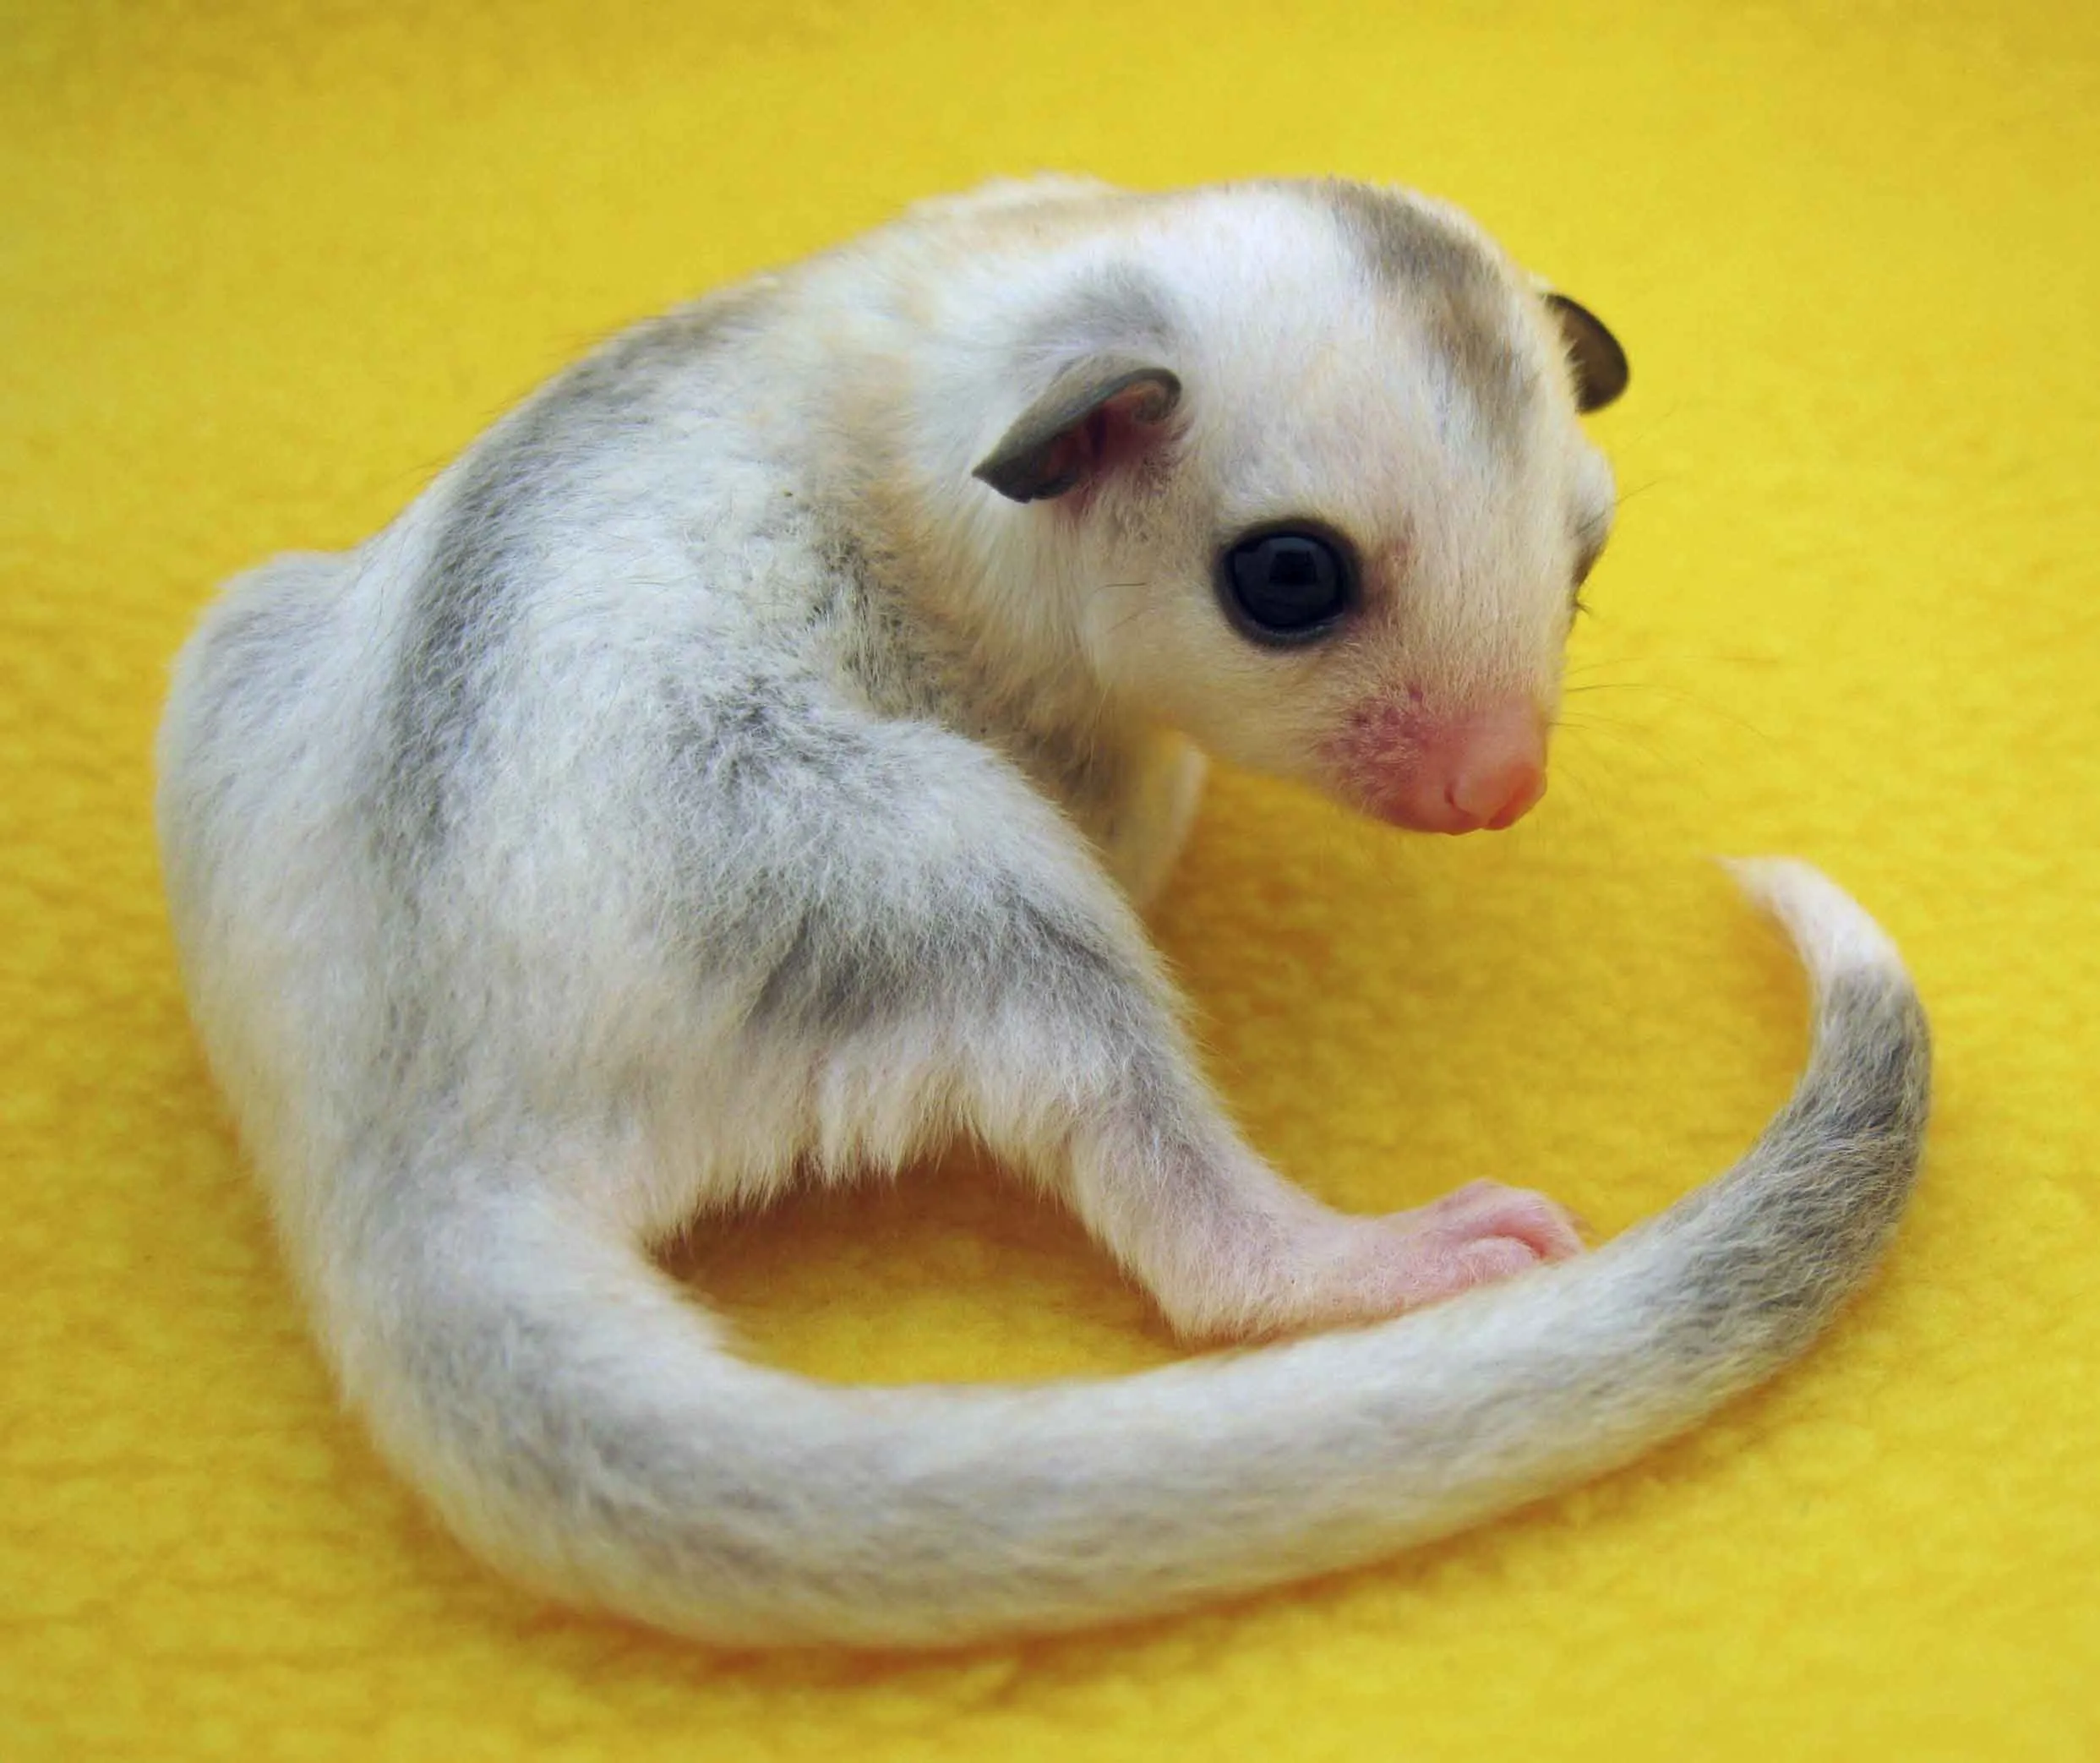 20 Fun Facts About Sugar Gliders That Will Surprise You